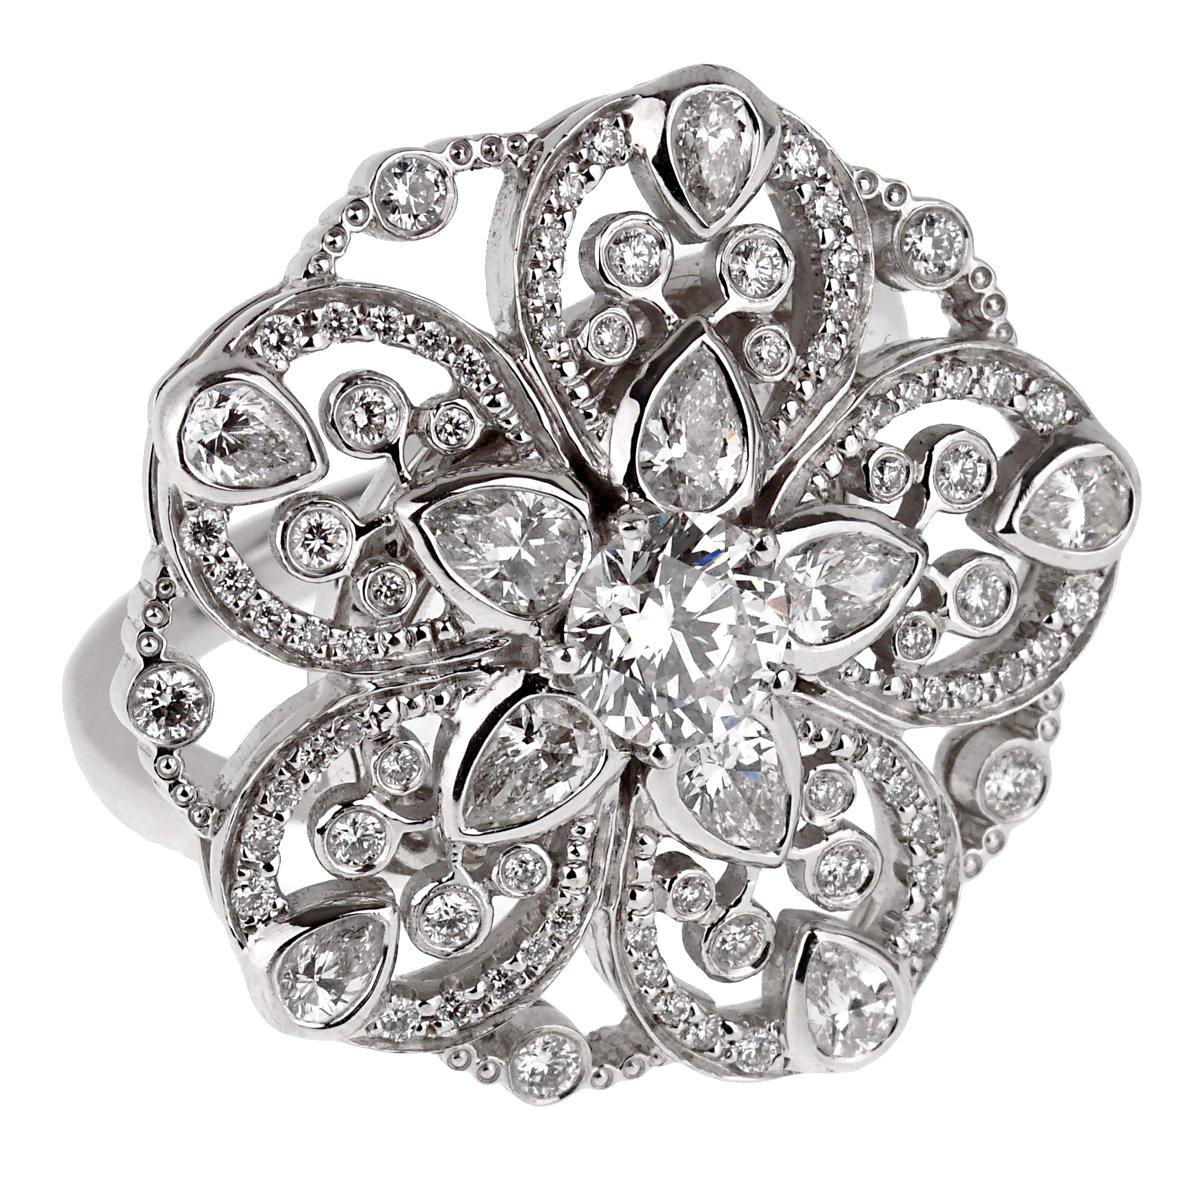 An extraordinary diamond white gold cocktail ring by Chanel that features 2.35 carats of the finest of round brilliant cut and pear shaped diamonds that are set in 18k white gold.

Width .95